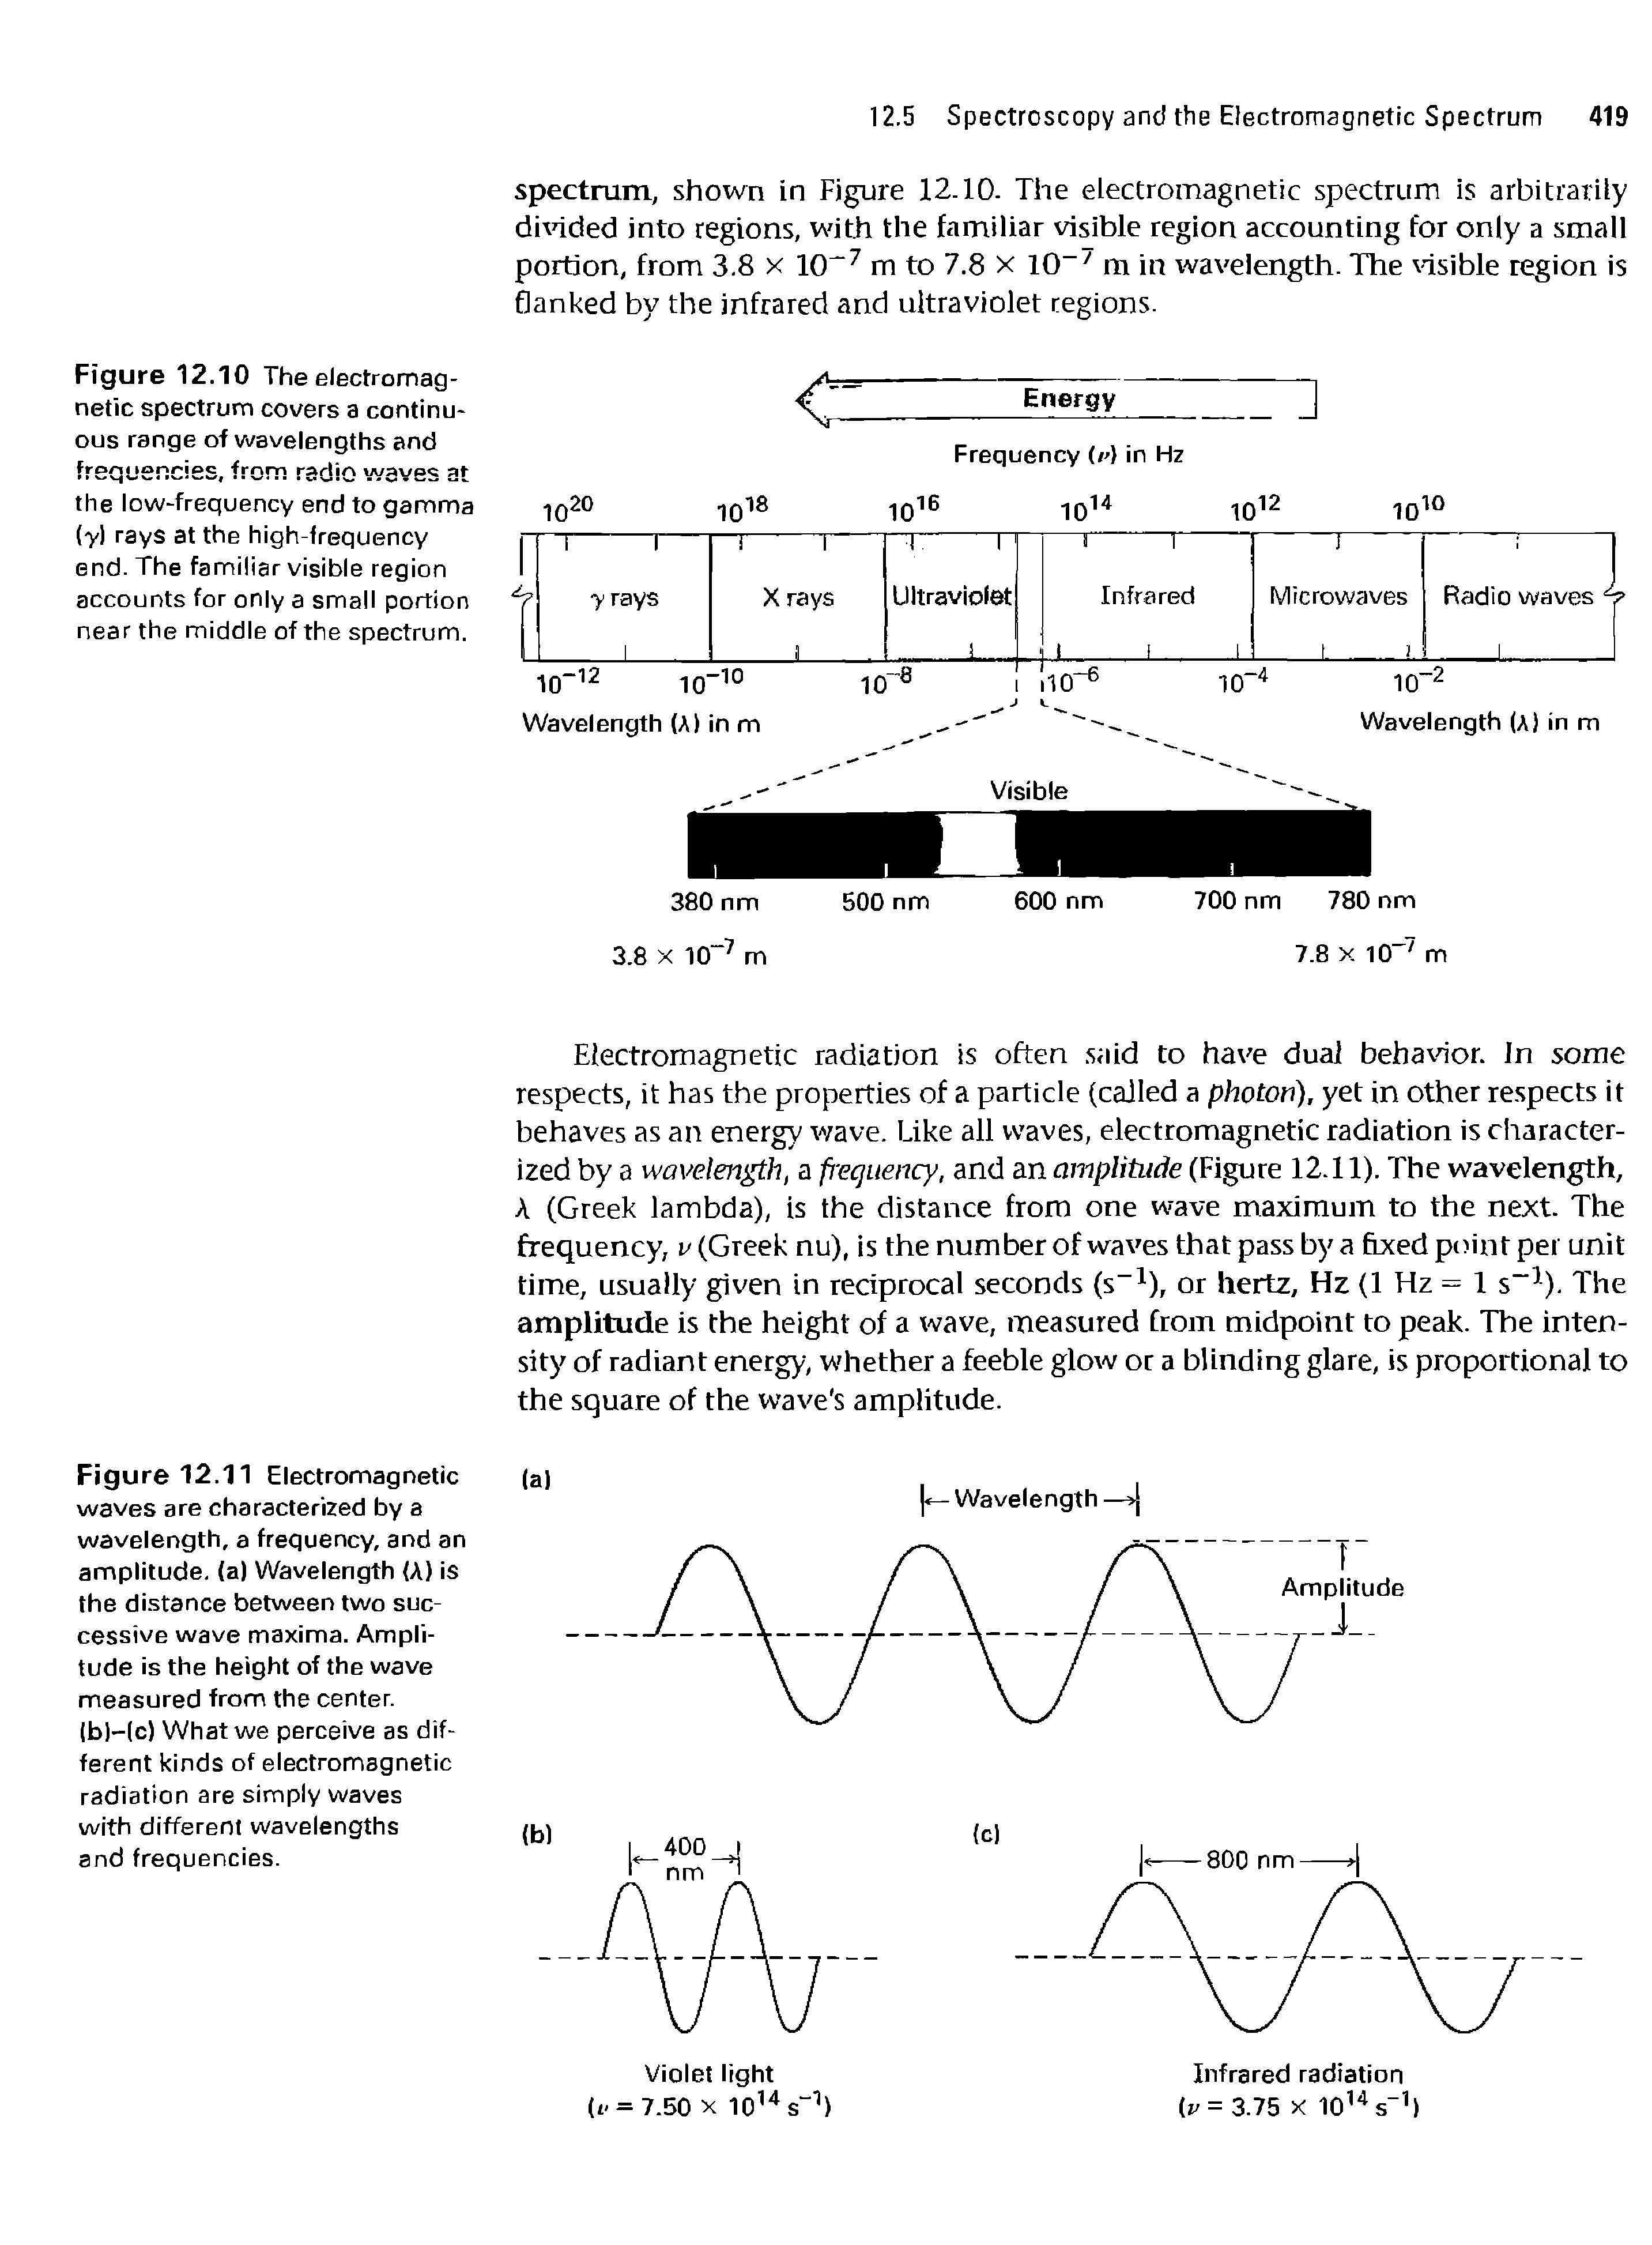 Figure 12.11 Electromagnetic waves are characterized by a wavelength, a frequency, and an amplitude, (a) Wavelength (A) is the distance between two successive wave maxima. Amplitude is the height of the wave measured from the center. (b)-(c) What we perceive as different kinds of electromagnetic radiation are simply waves with different wavelengths and frequencies.